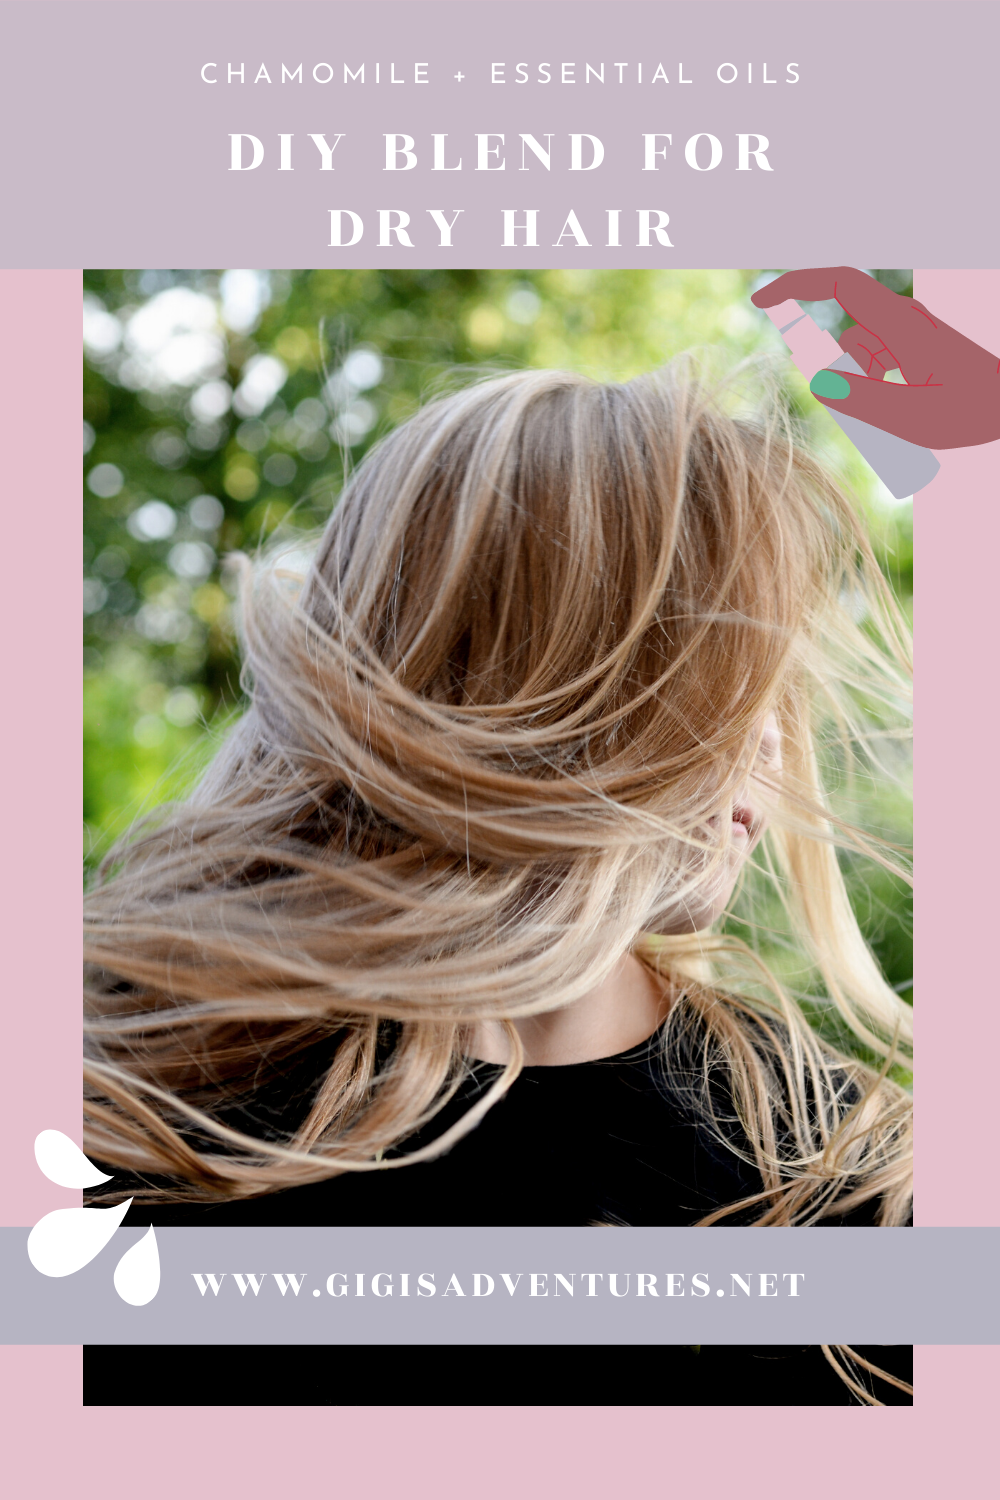 DIY Blend for Dry Hair | with Chamomile and Essential Oils